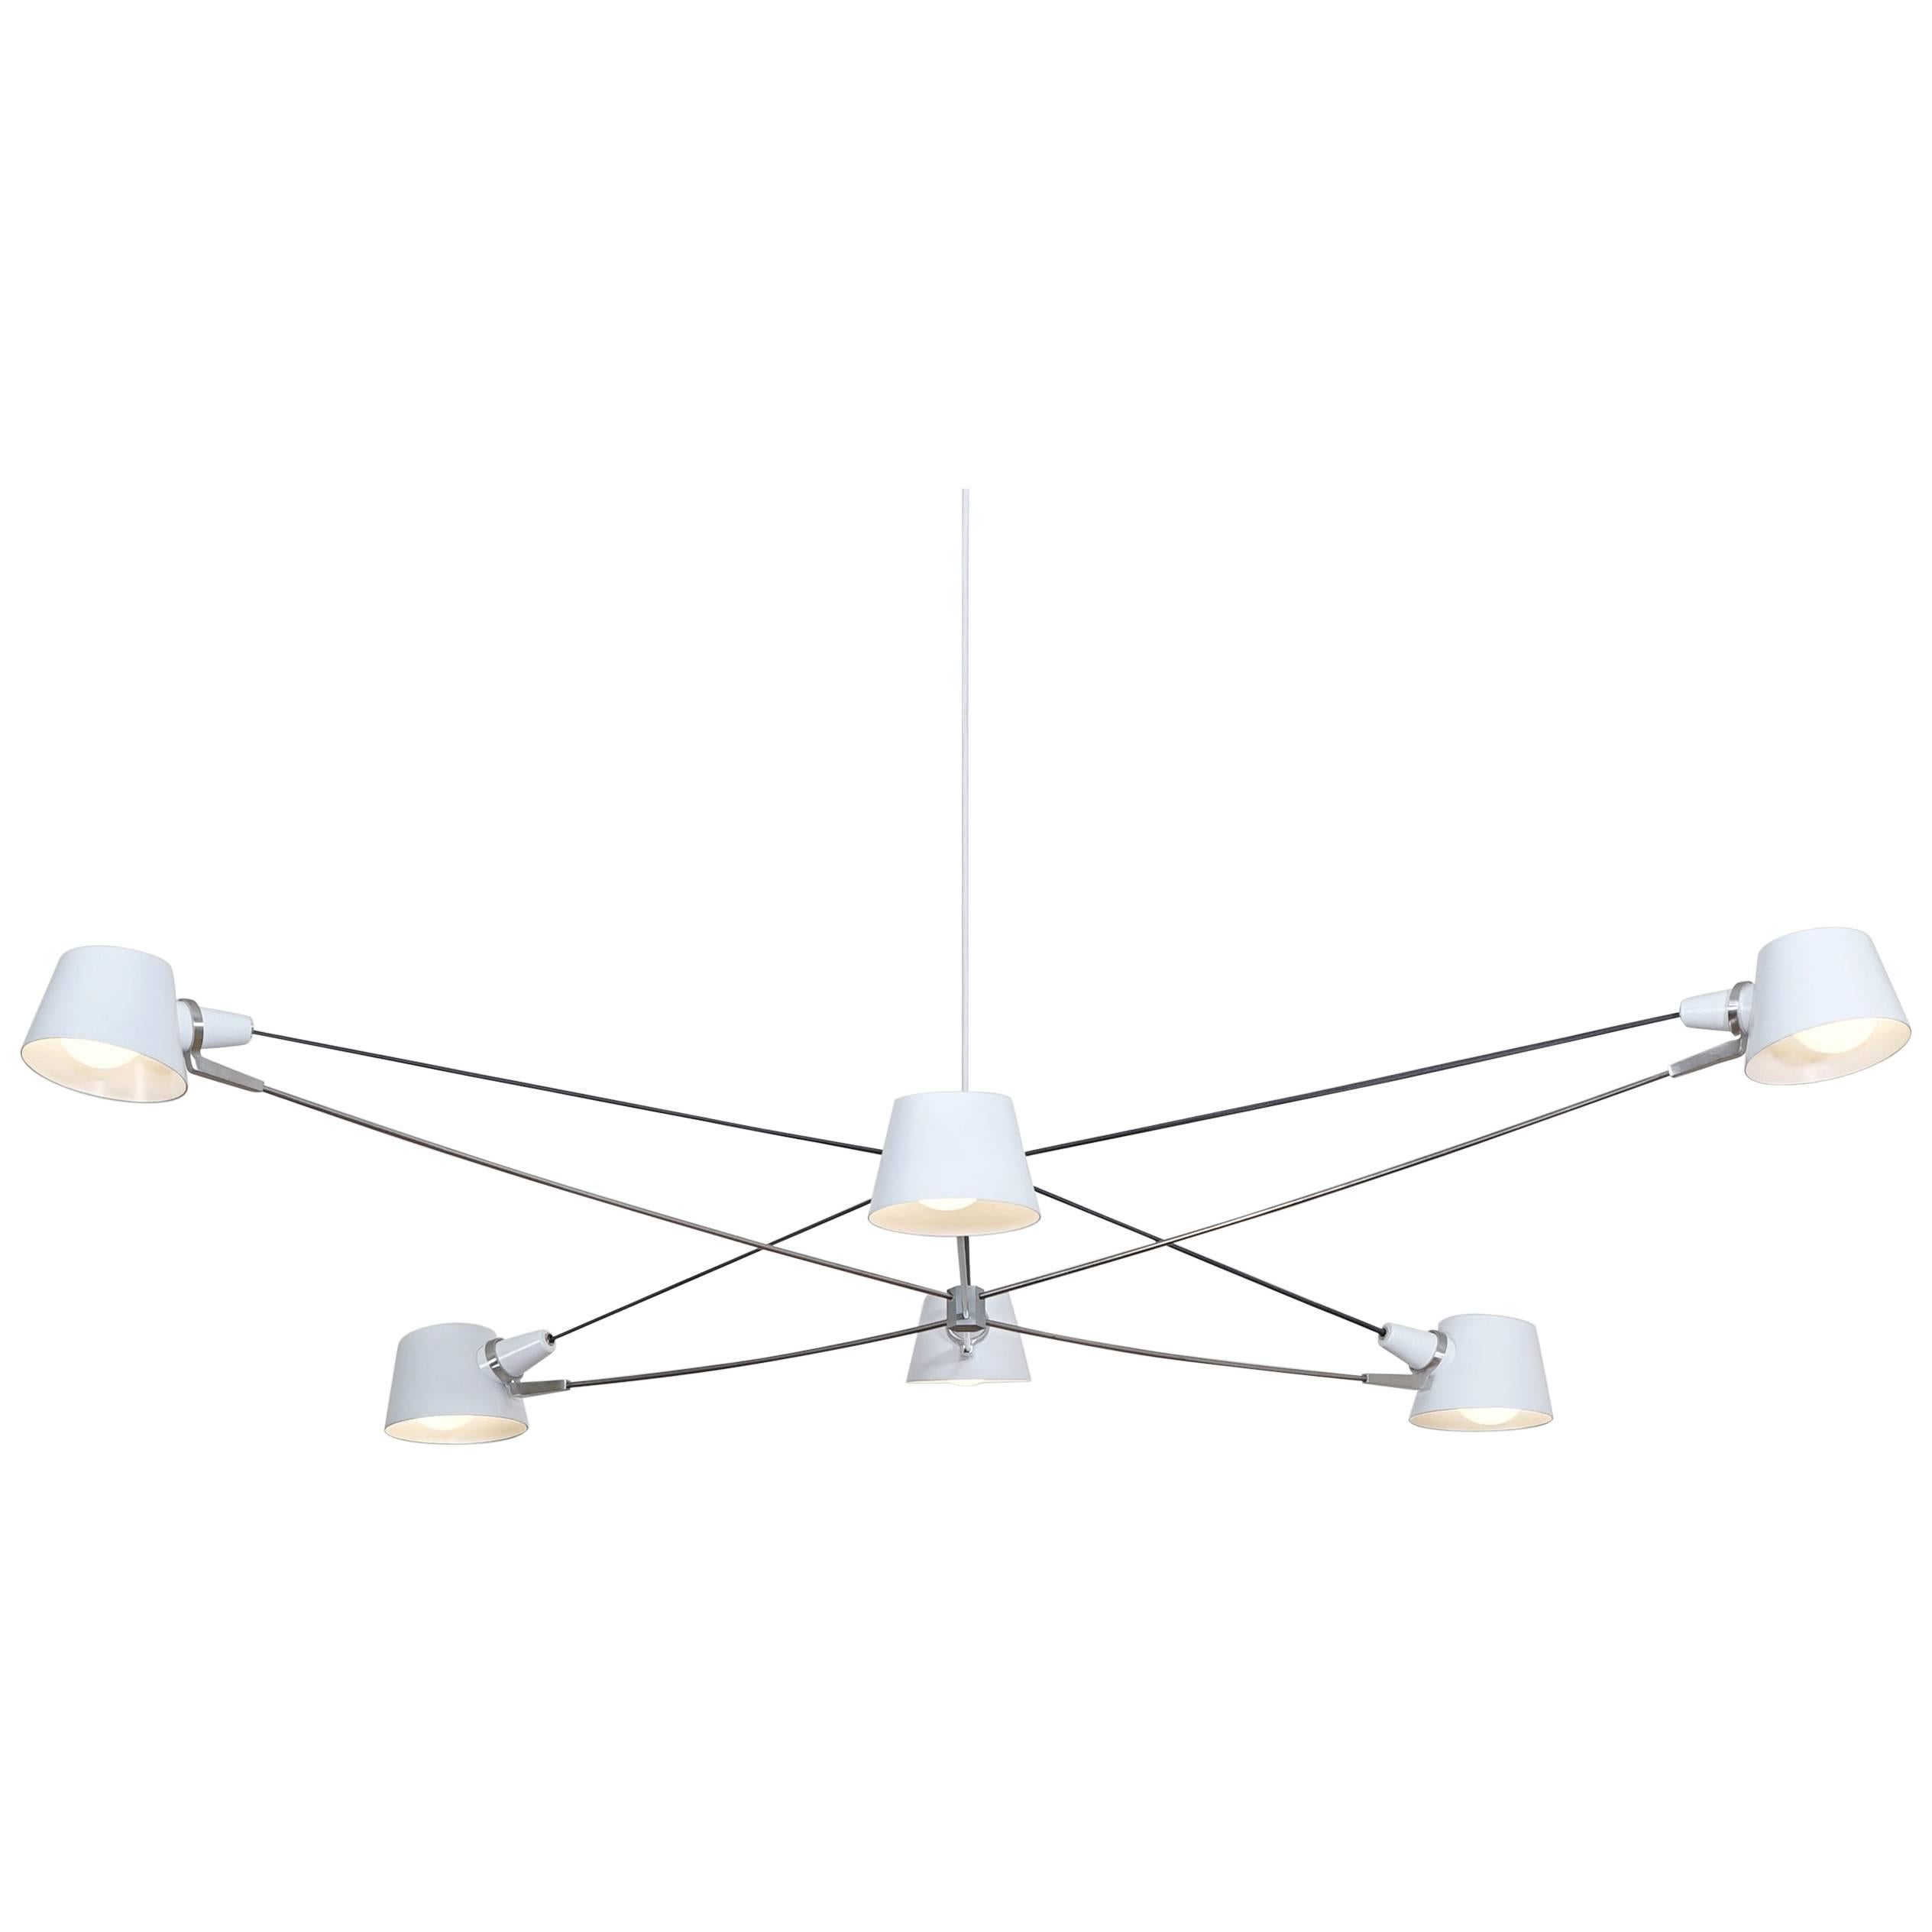 Pivot Chandelier White & Stainless by Ravenhill Studio